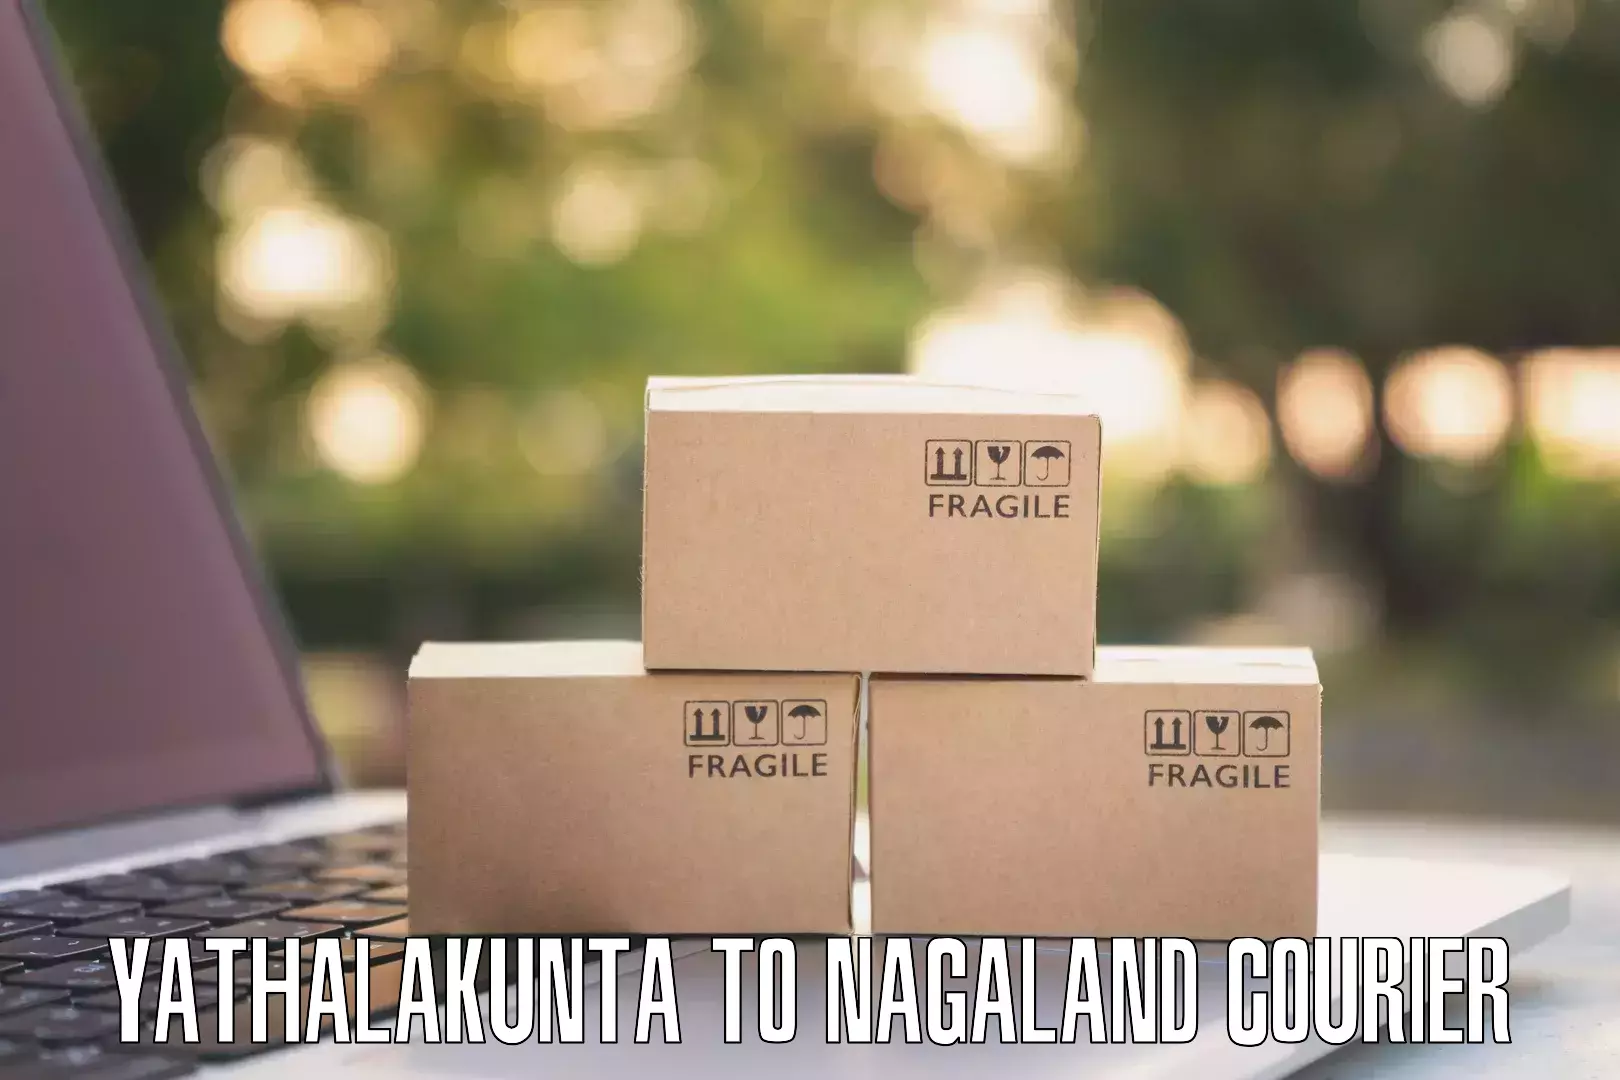 Round-the-clock parcel delivery Yathalakunta to Nagaland